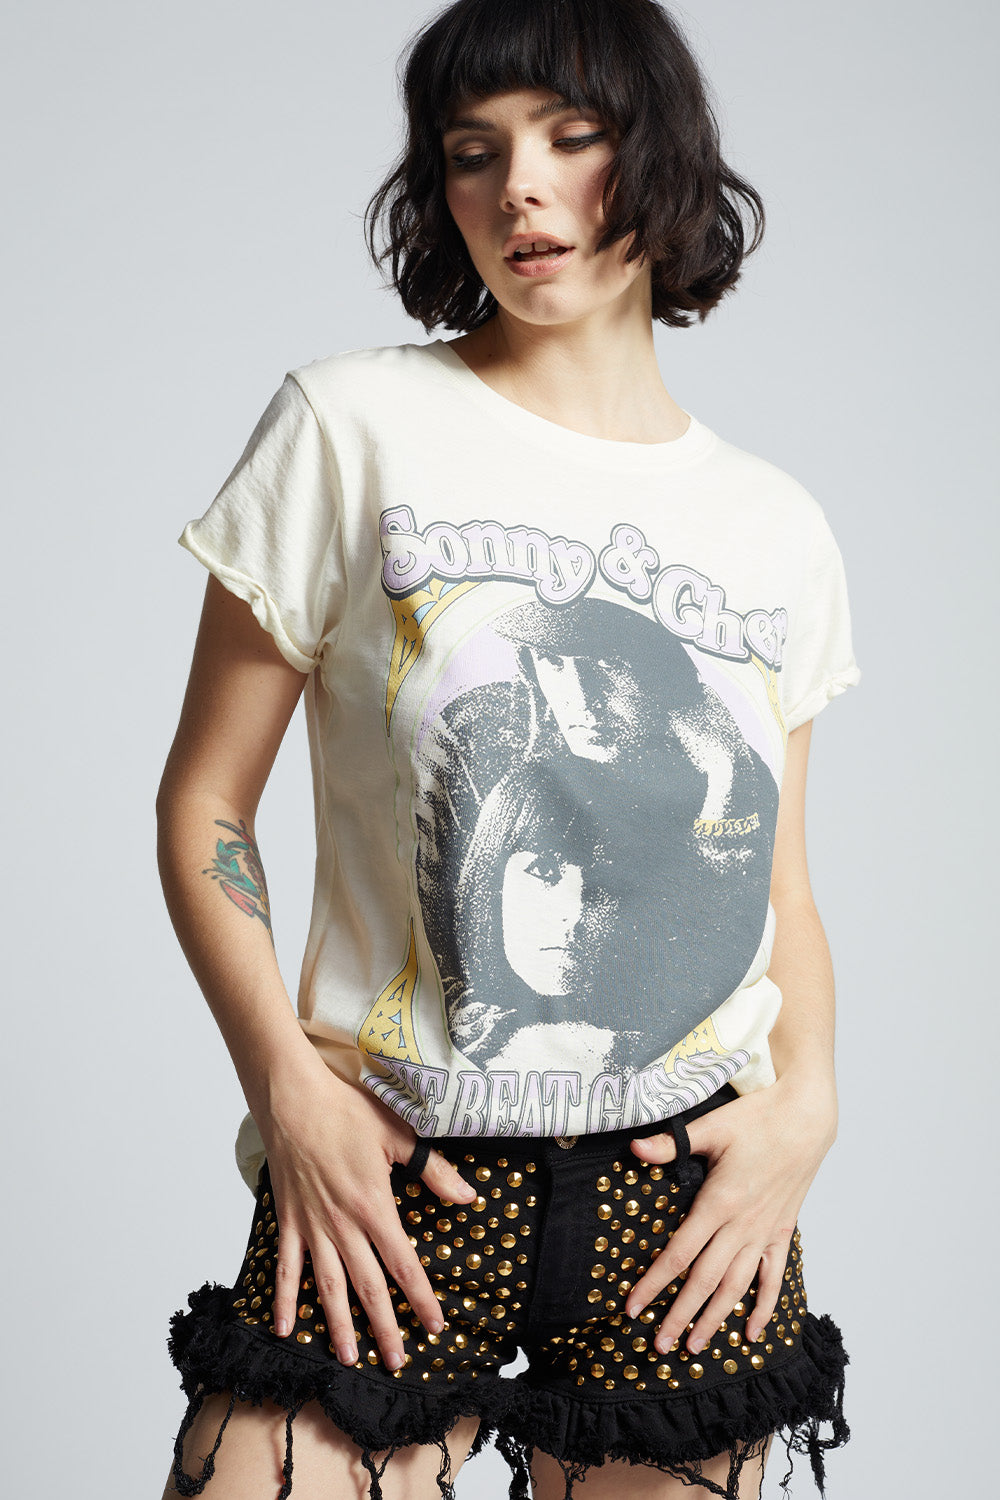 Sonny & Cher The Beat Goes On Tee